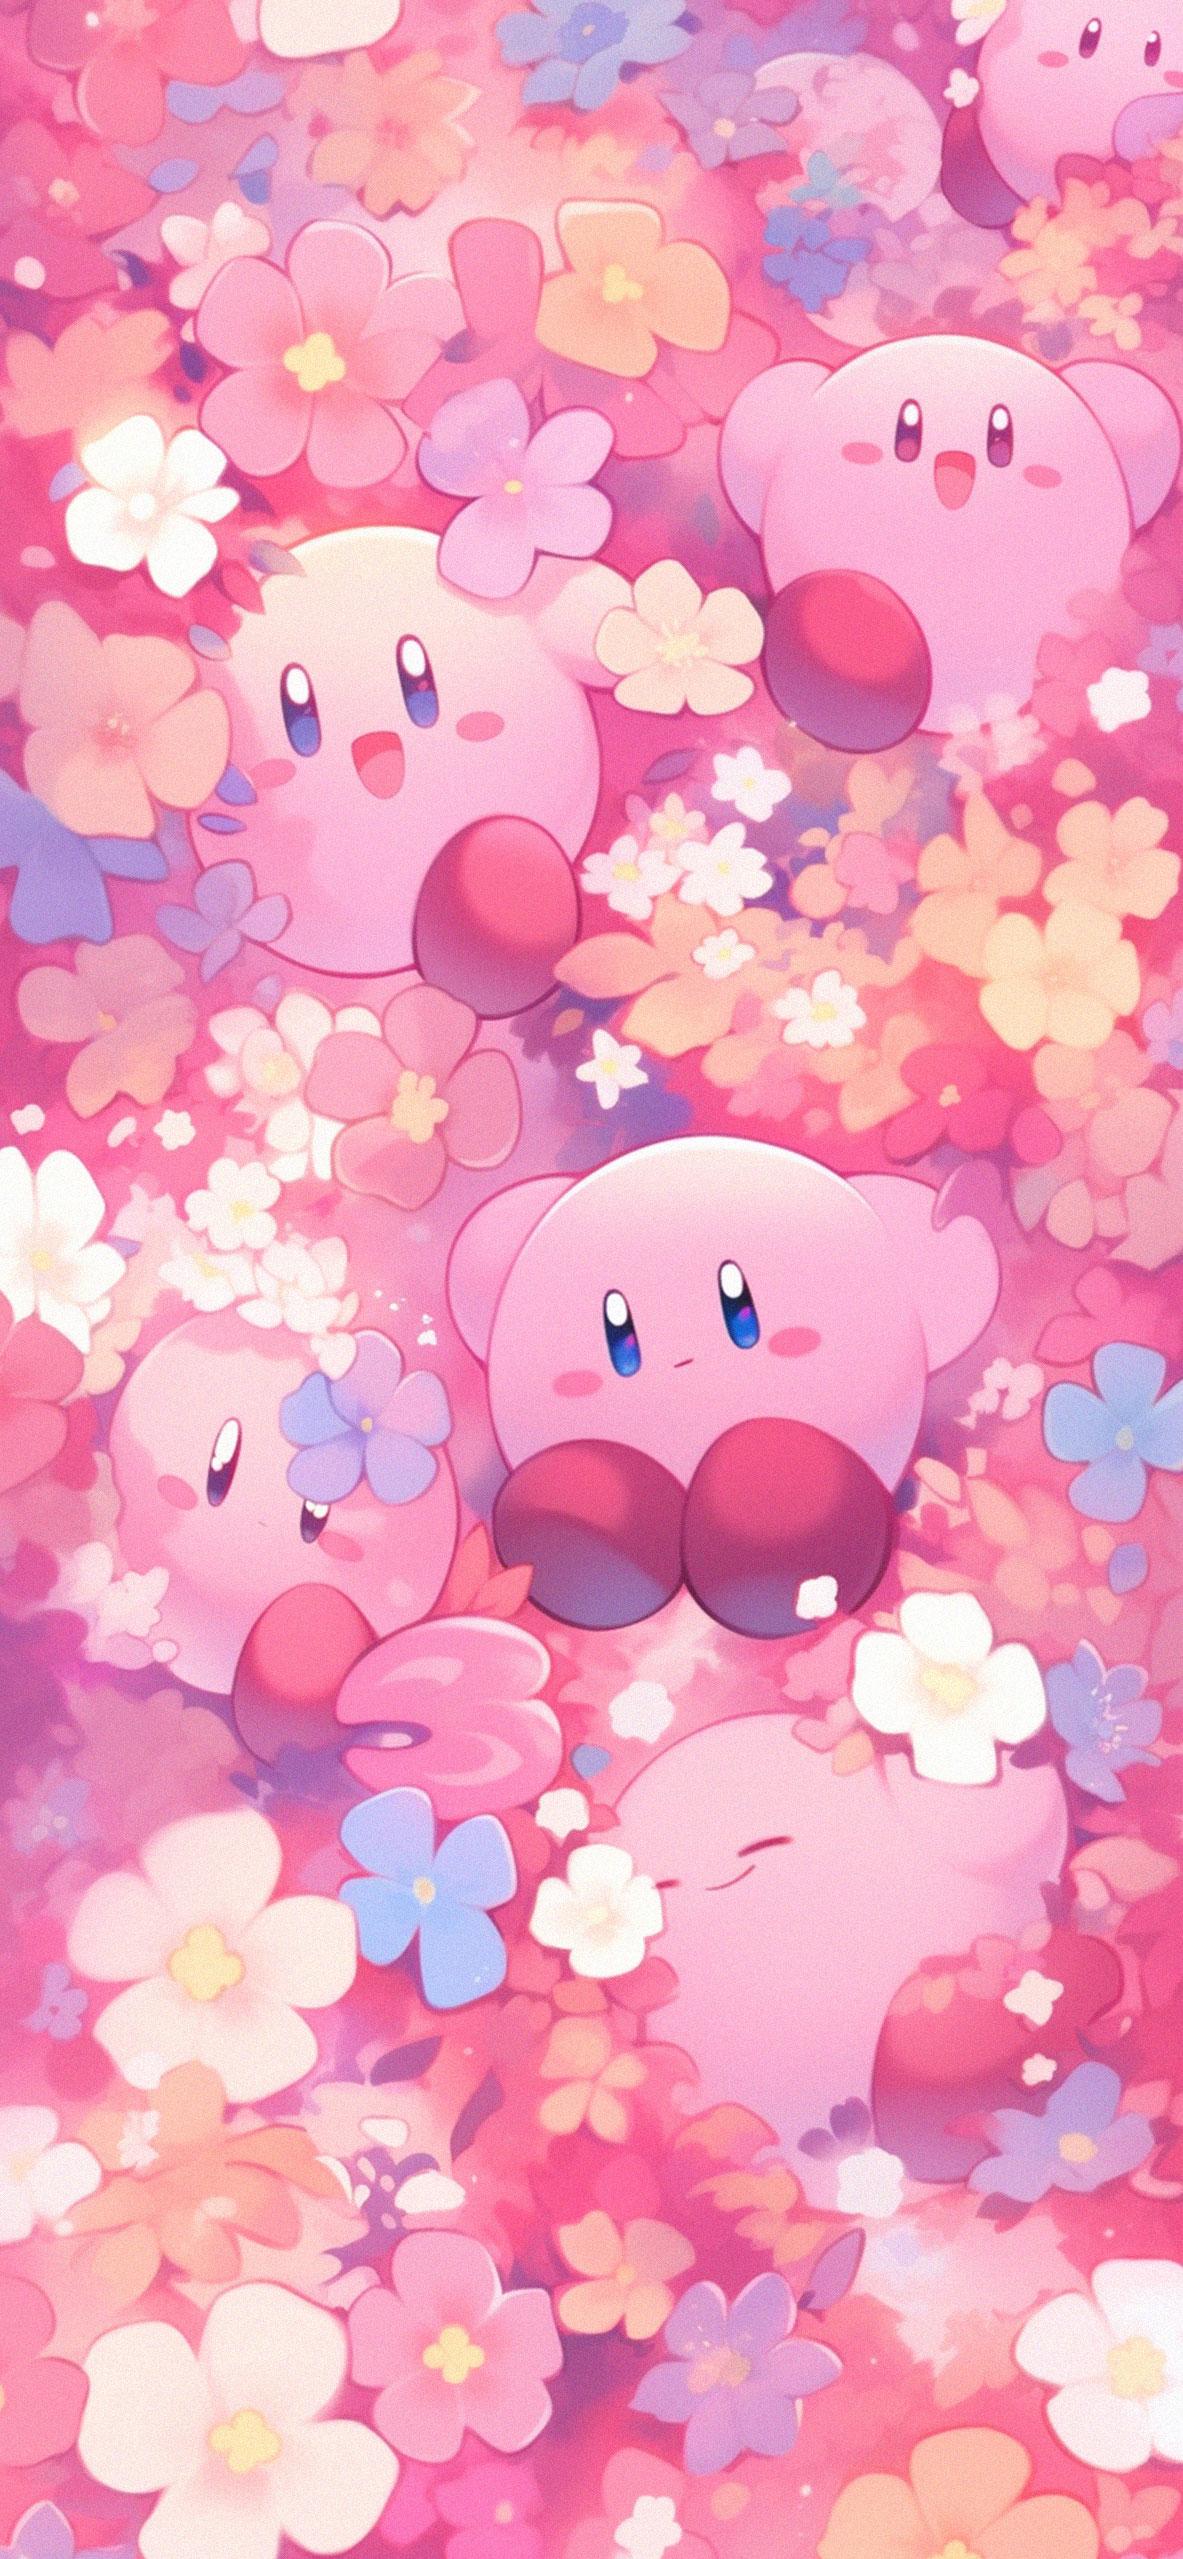 Kirby Playing Among The Flowers Art Wallpaper